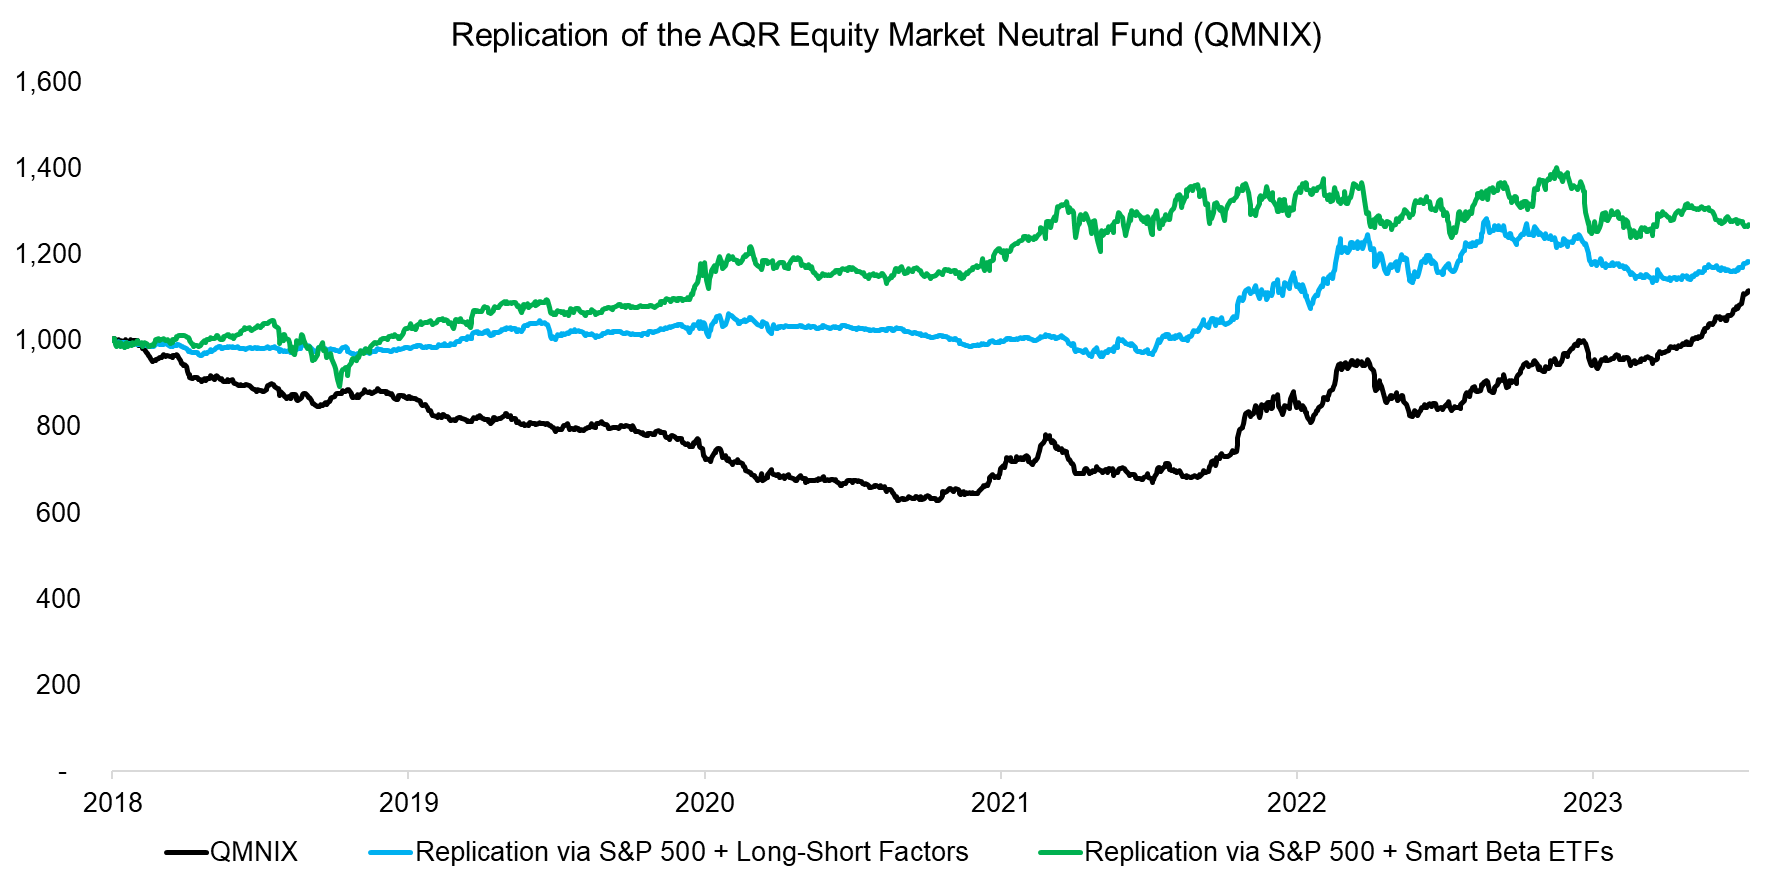 Replication of the AQR Equity Market Neutral Fund (QMNIX)